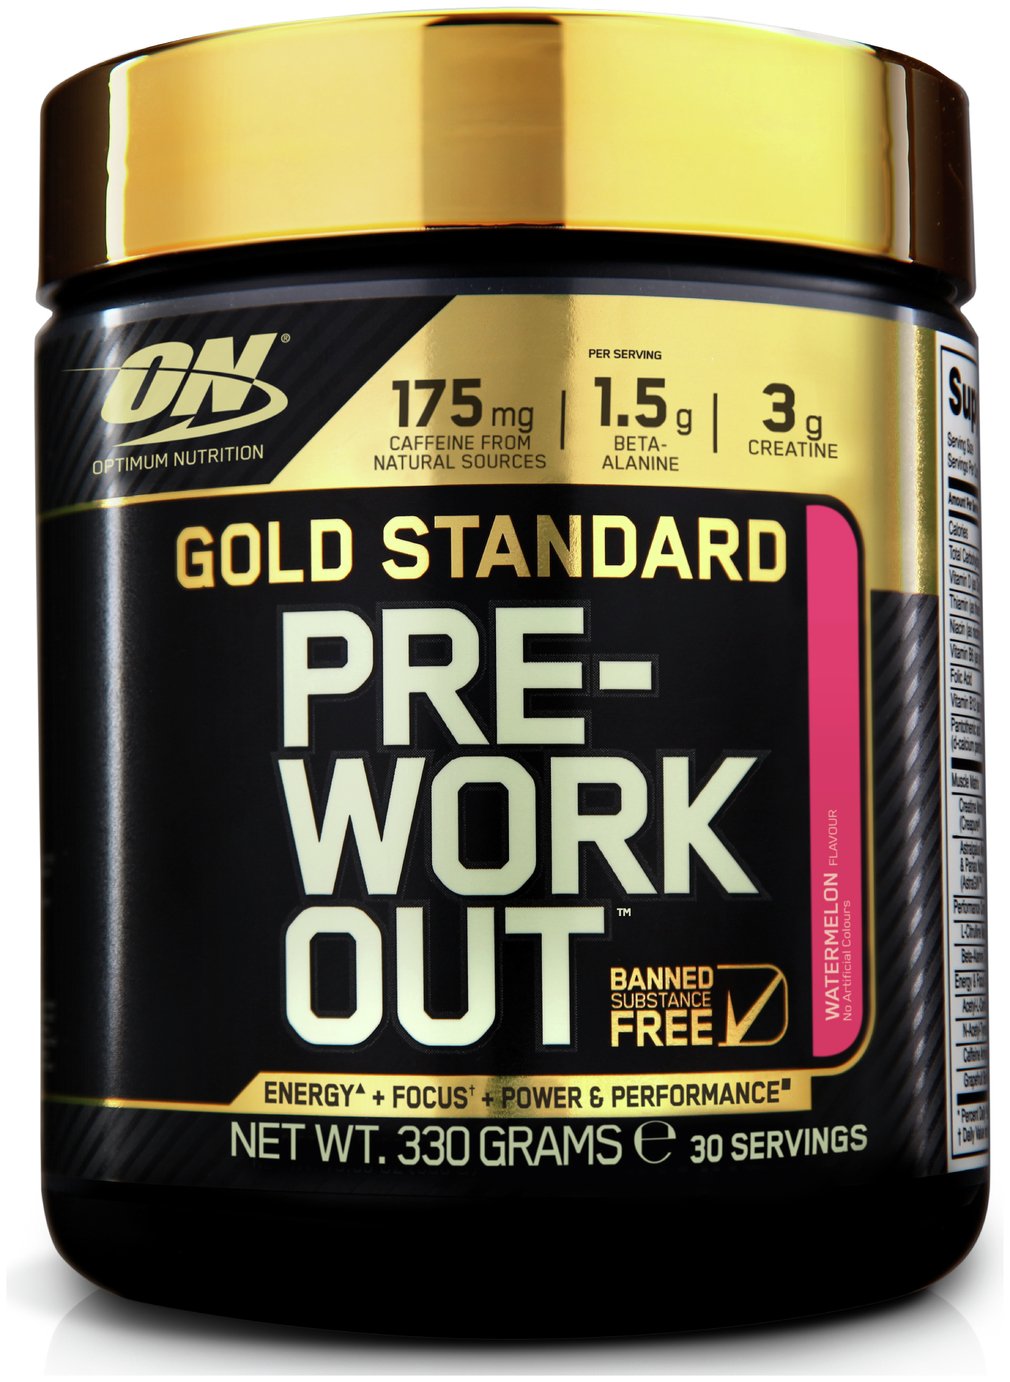 Optimum Nutrition Gold Standard Pre Workout Shake review